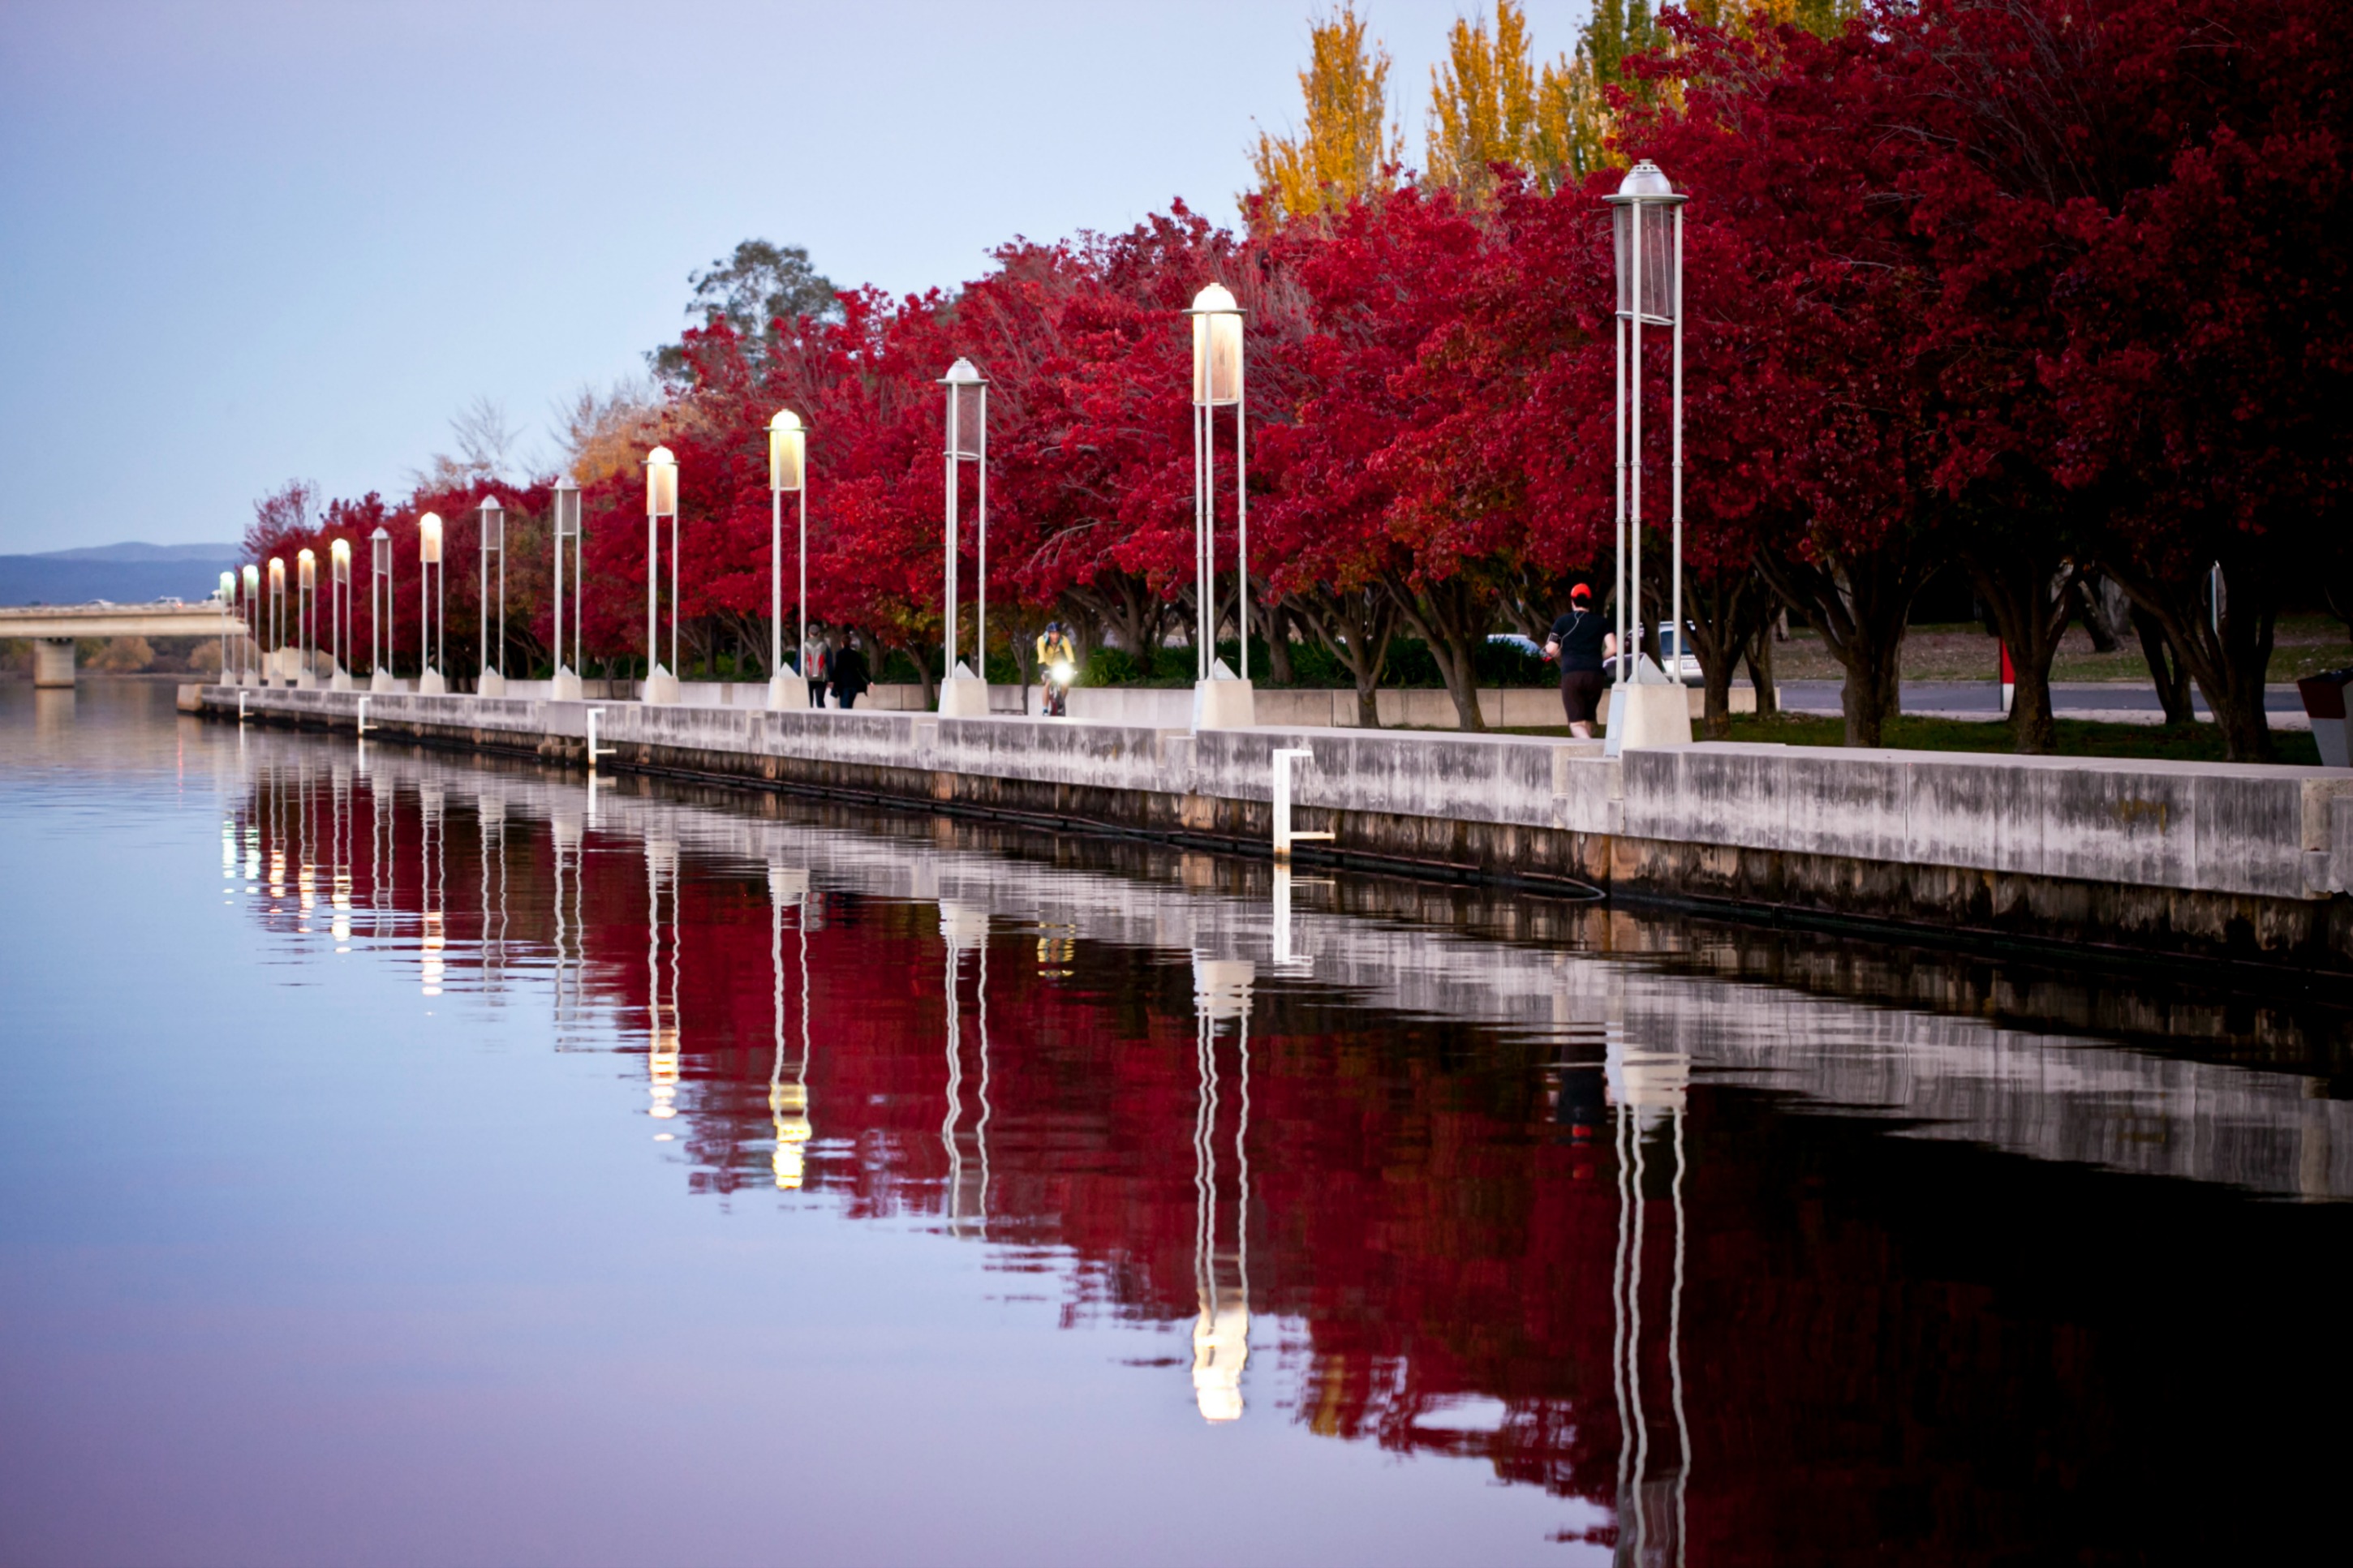 The tree-lined water’s edge of Lake Burley Griffin in Canberra